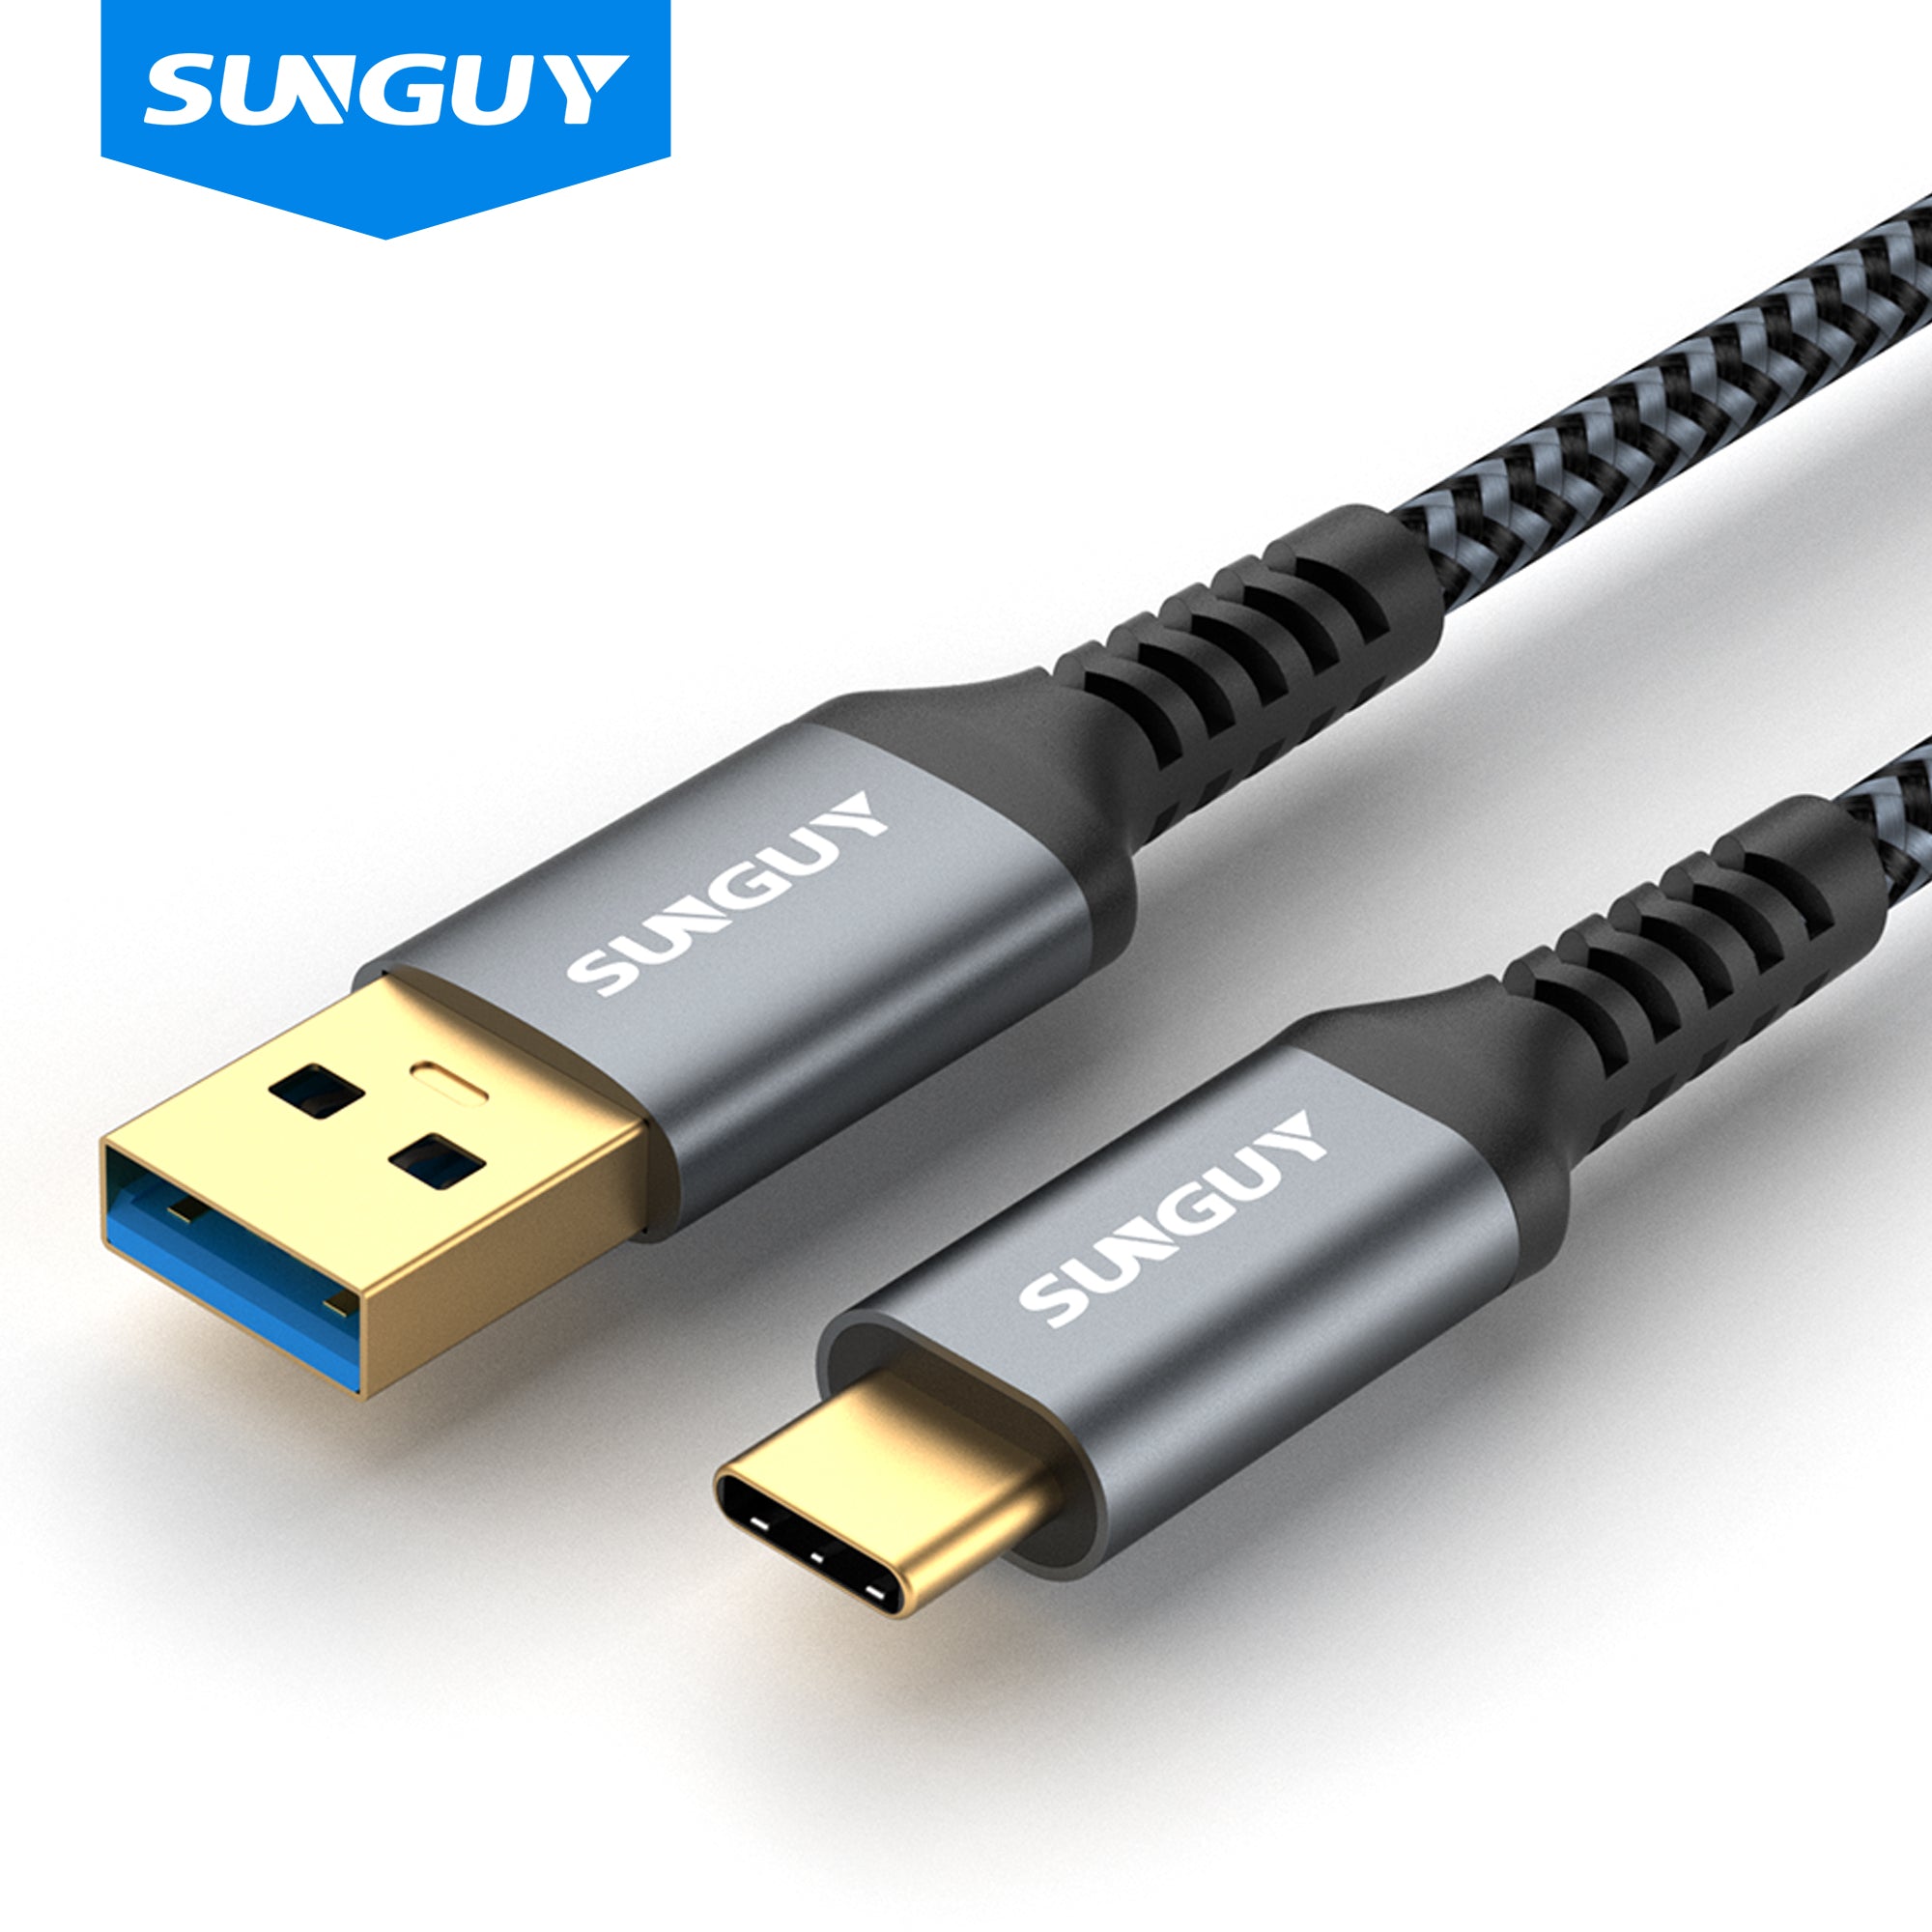 Android Auto Cable 3.3 FT, USB C To USB 3.1 USB 3.2 Gen2 10Gbps USB A To C  Data Fast Charging Cable Compatible With * Galaxy S21 S20 S10 S10E No